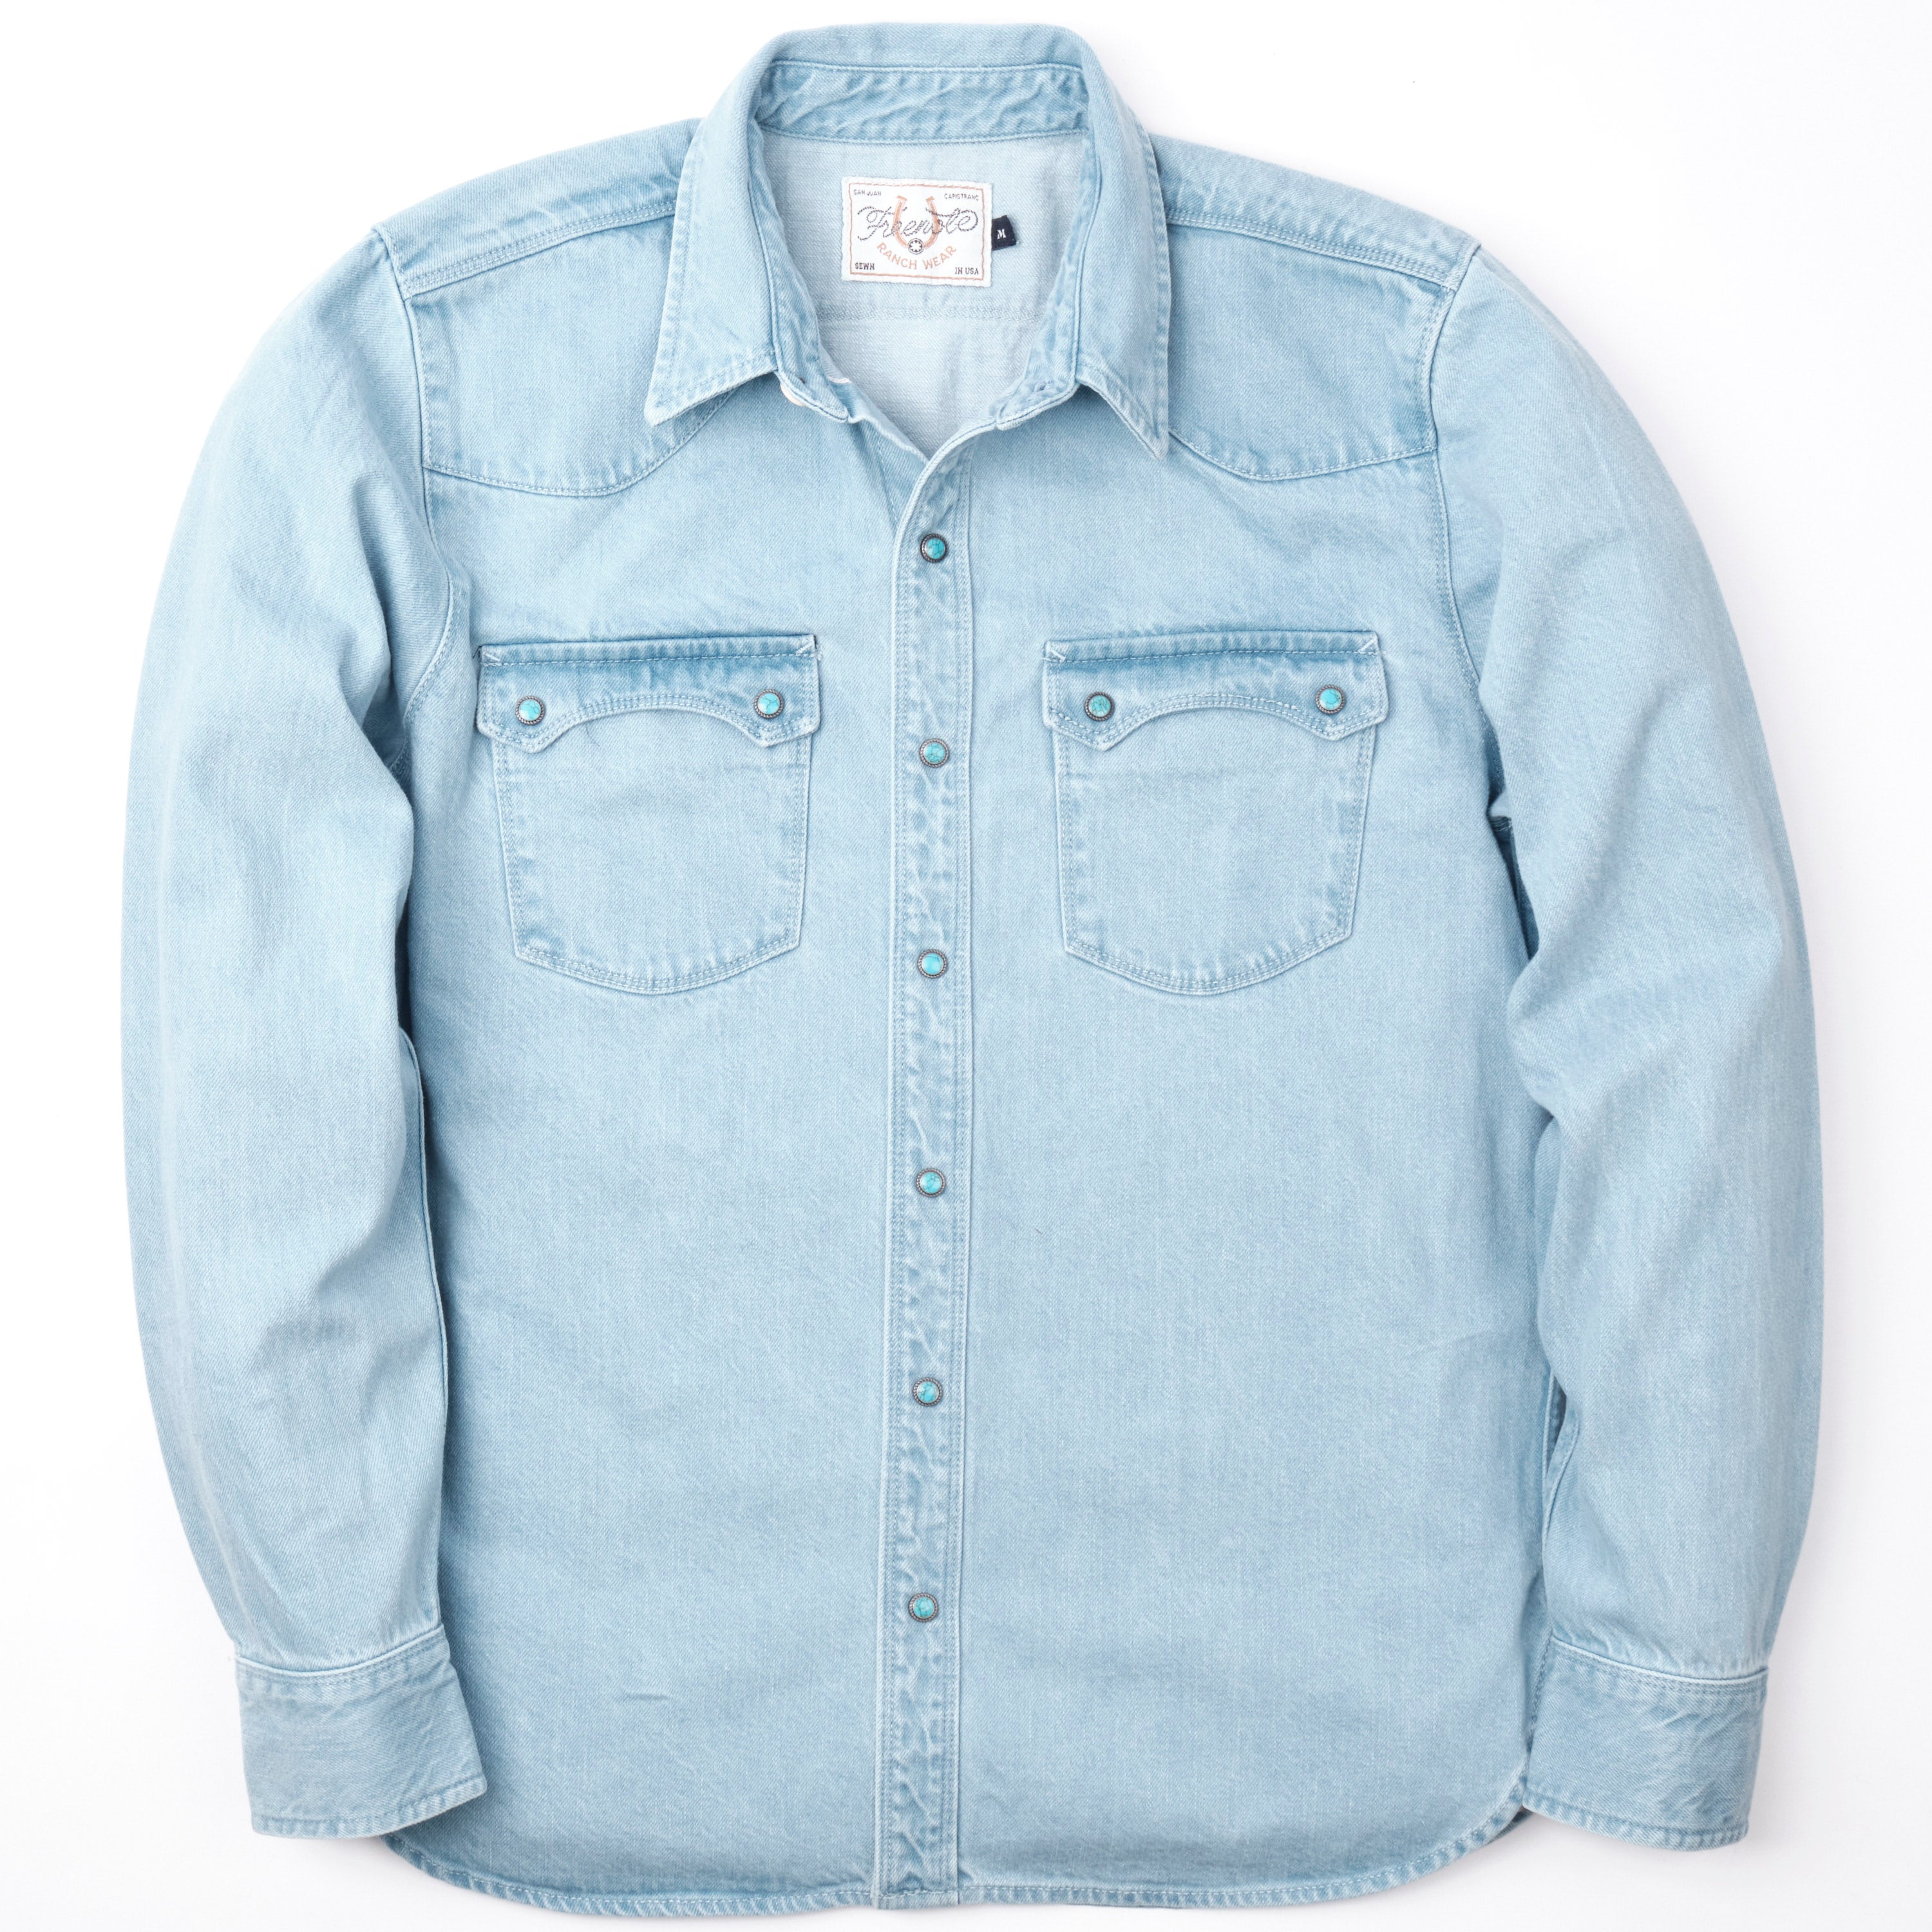 AEO Bleached Denim Shirt - ShopStyle | Mens outfitters, Shirts, Bleached  denim